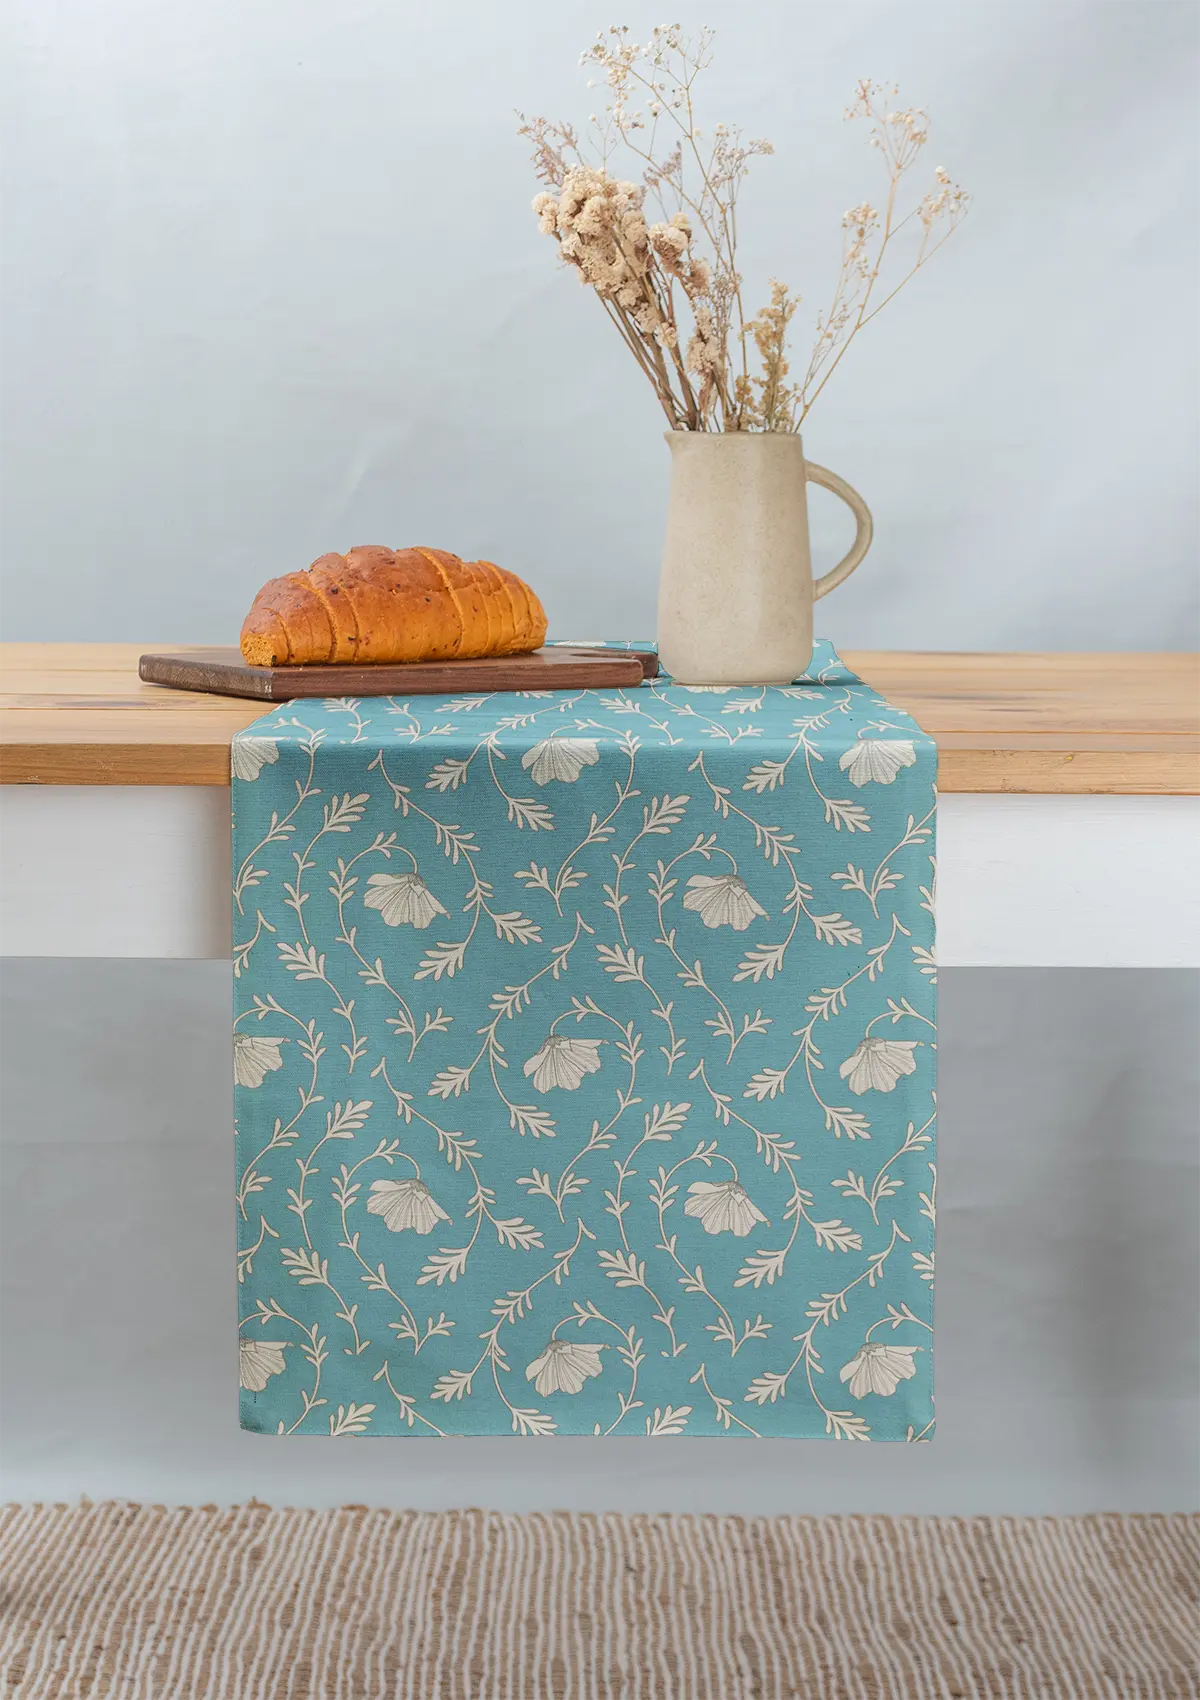 Eden aqua blue 100% cotton floral table runner for 4 seater or 6 seater dining with lace border